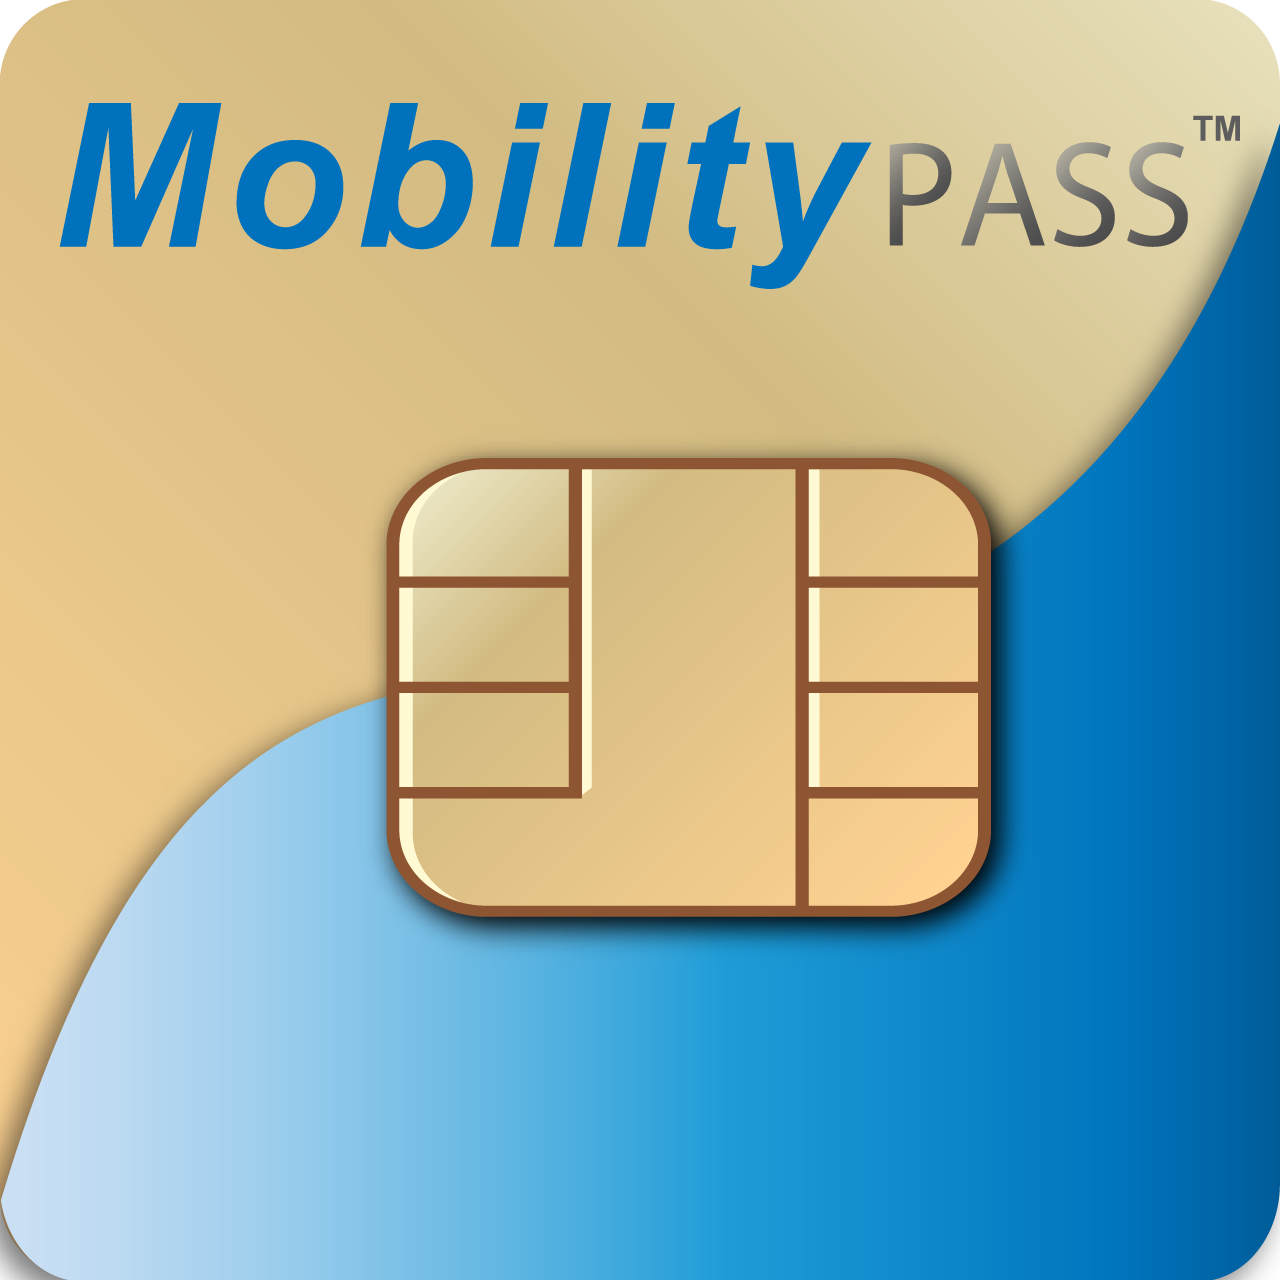 MobilityPass Pay-as-you-Go official web